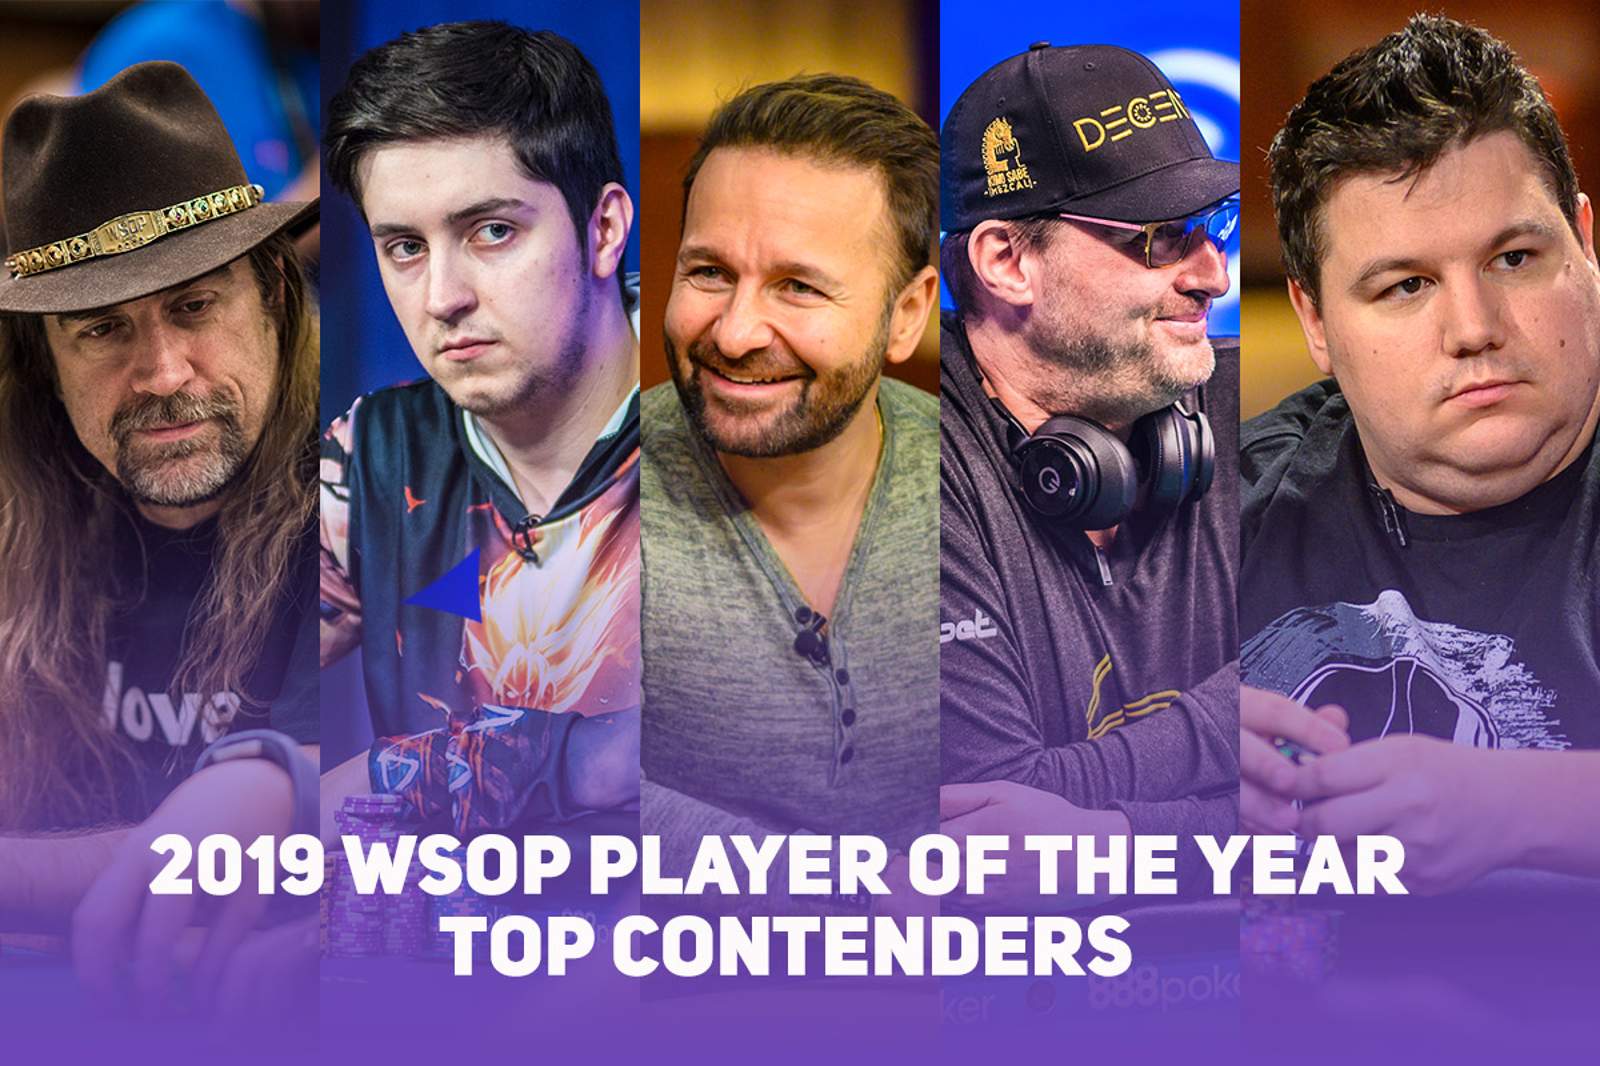 Breaking Down the 2019 WSOP Player of the Year Top Contenders